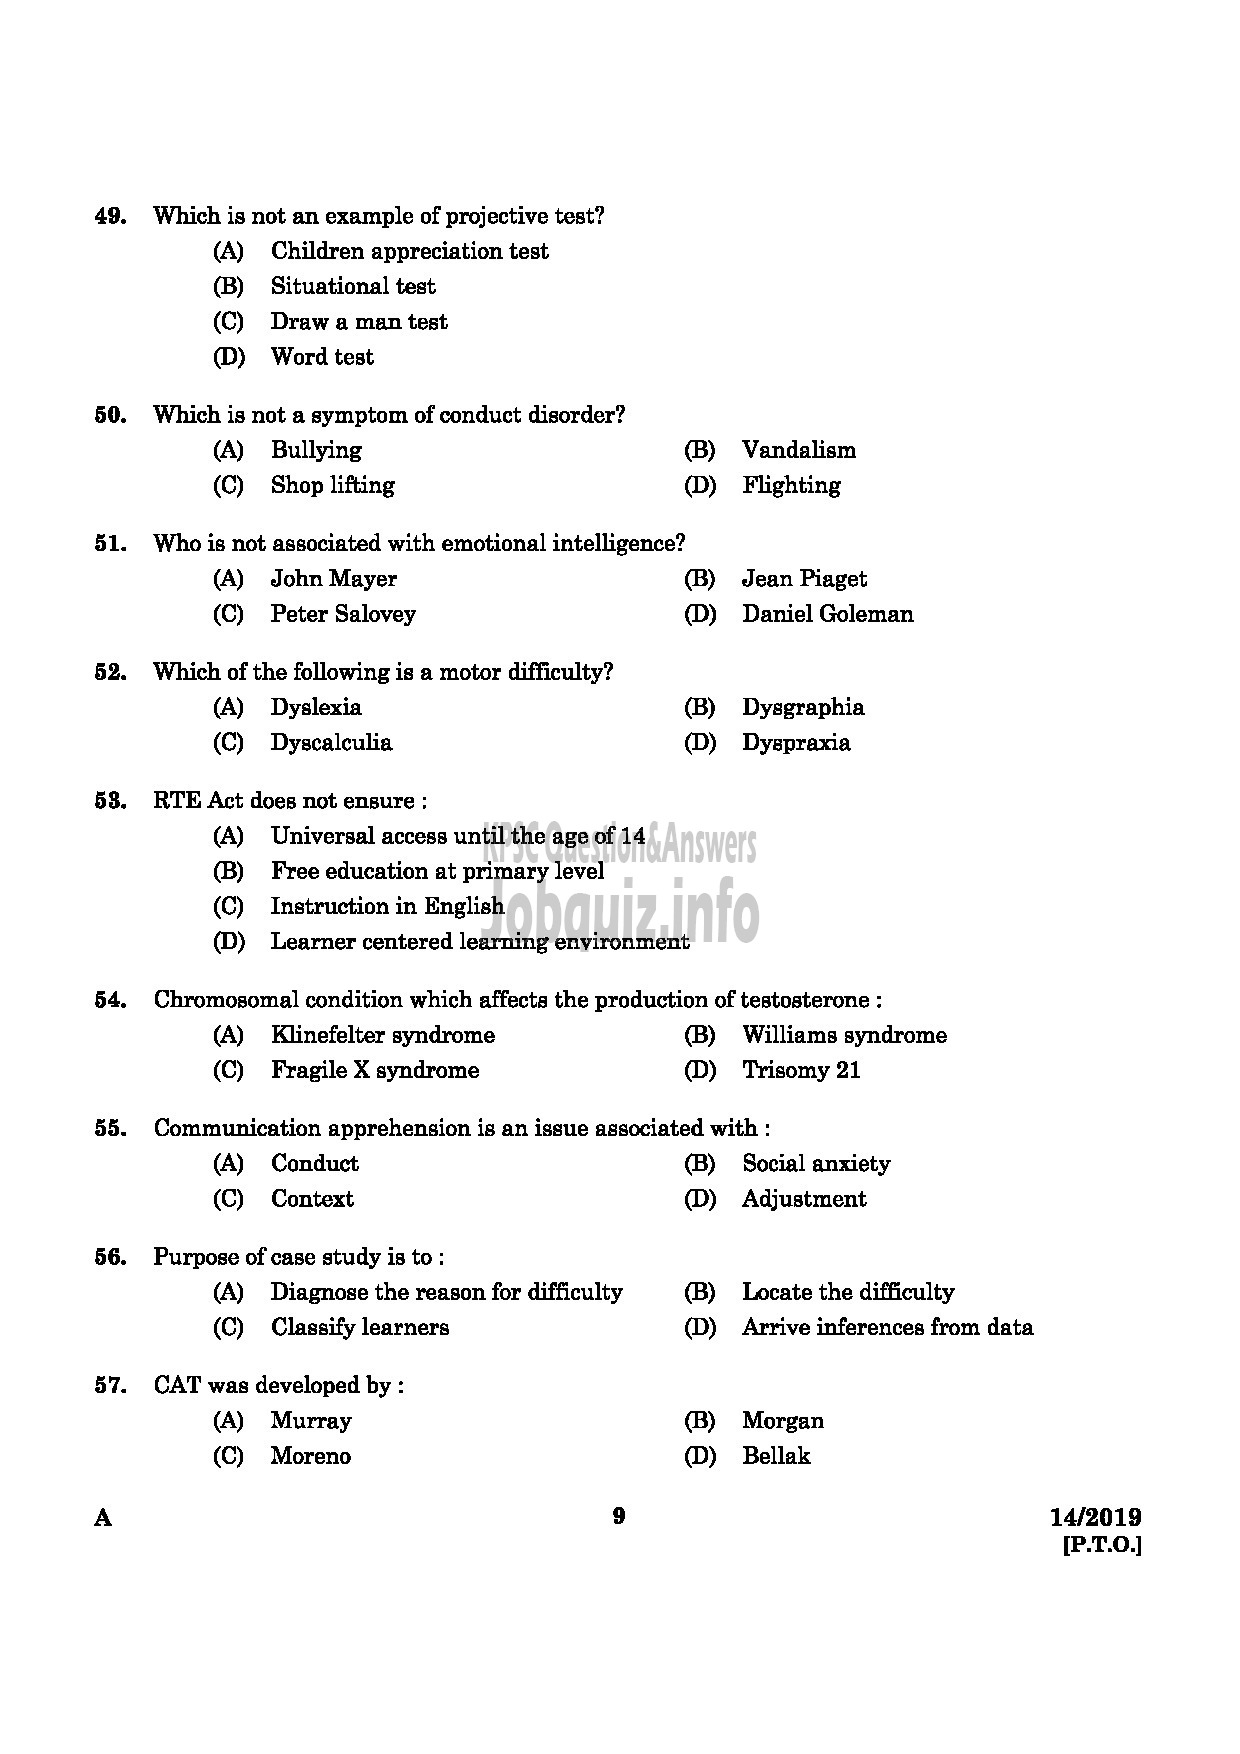 Kerala PSC Question Paper - SPECIAL TEACHER HOME FOR MENTALLY DEFICIENT CHILDREN SOCIAL JUSTICE DEPARTMENT-7